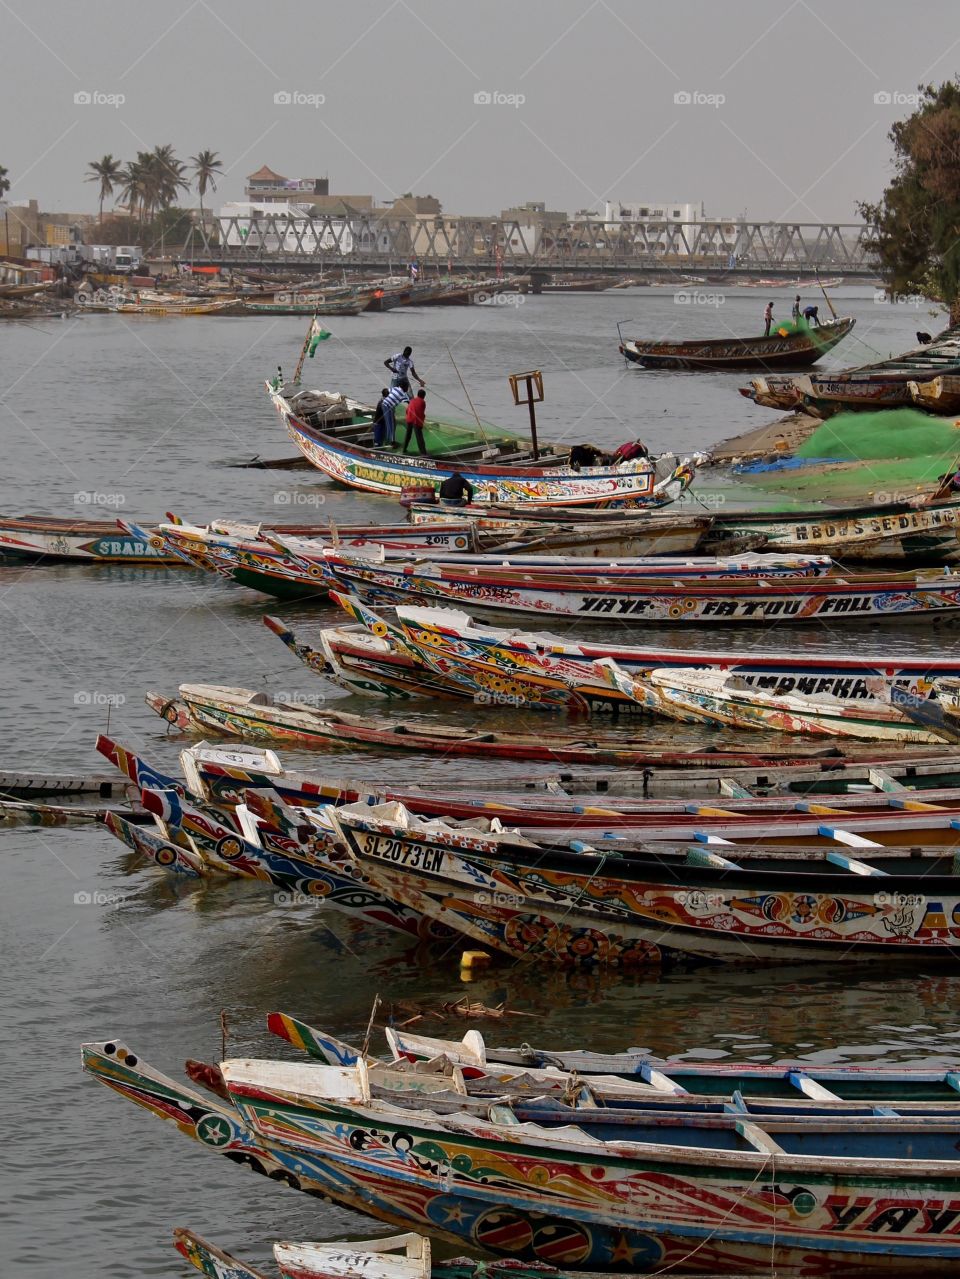 Pirogues on the Senegal river in Saint Louis